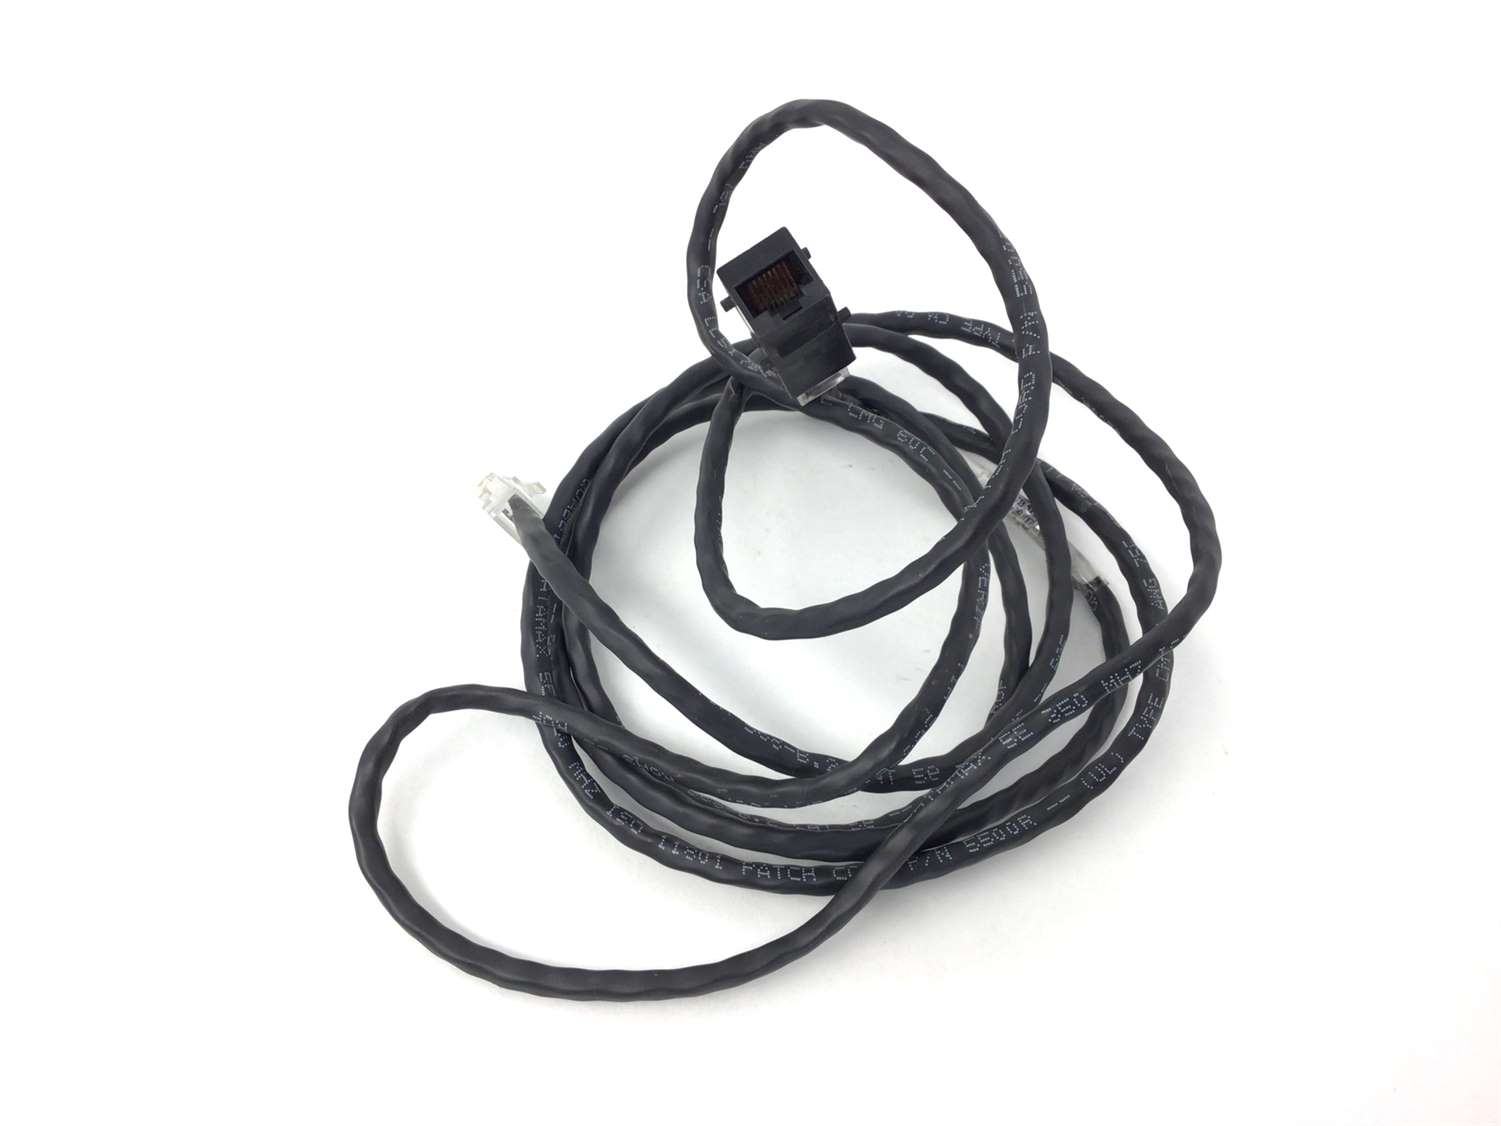 Cable Assembly Ethernet (Used)